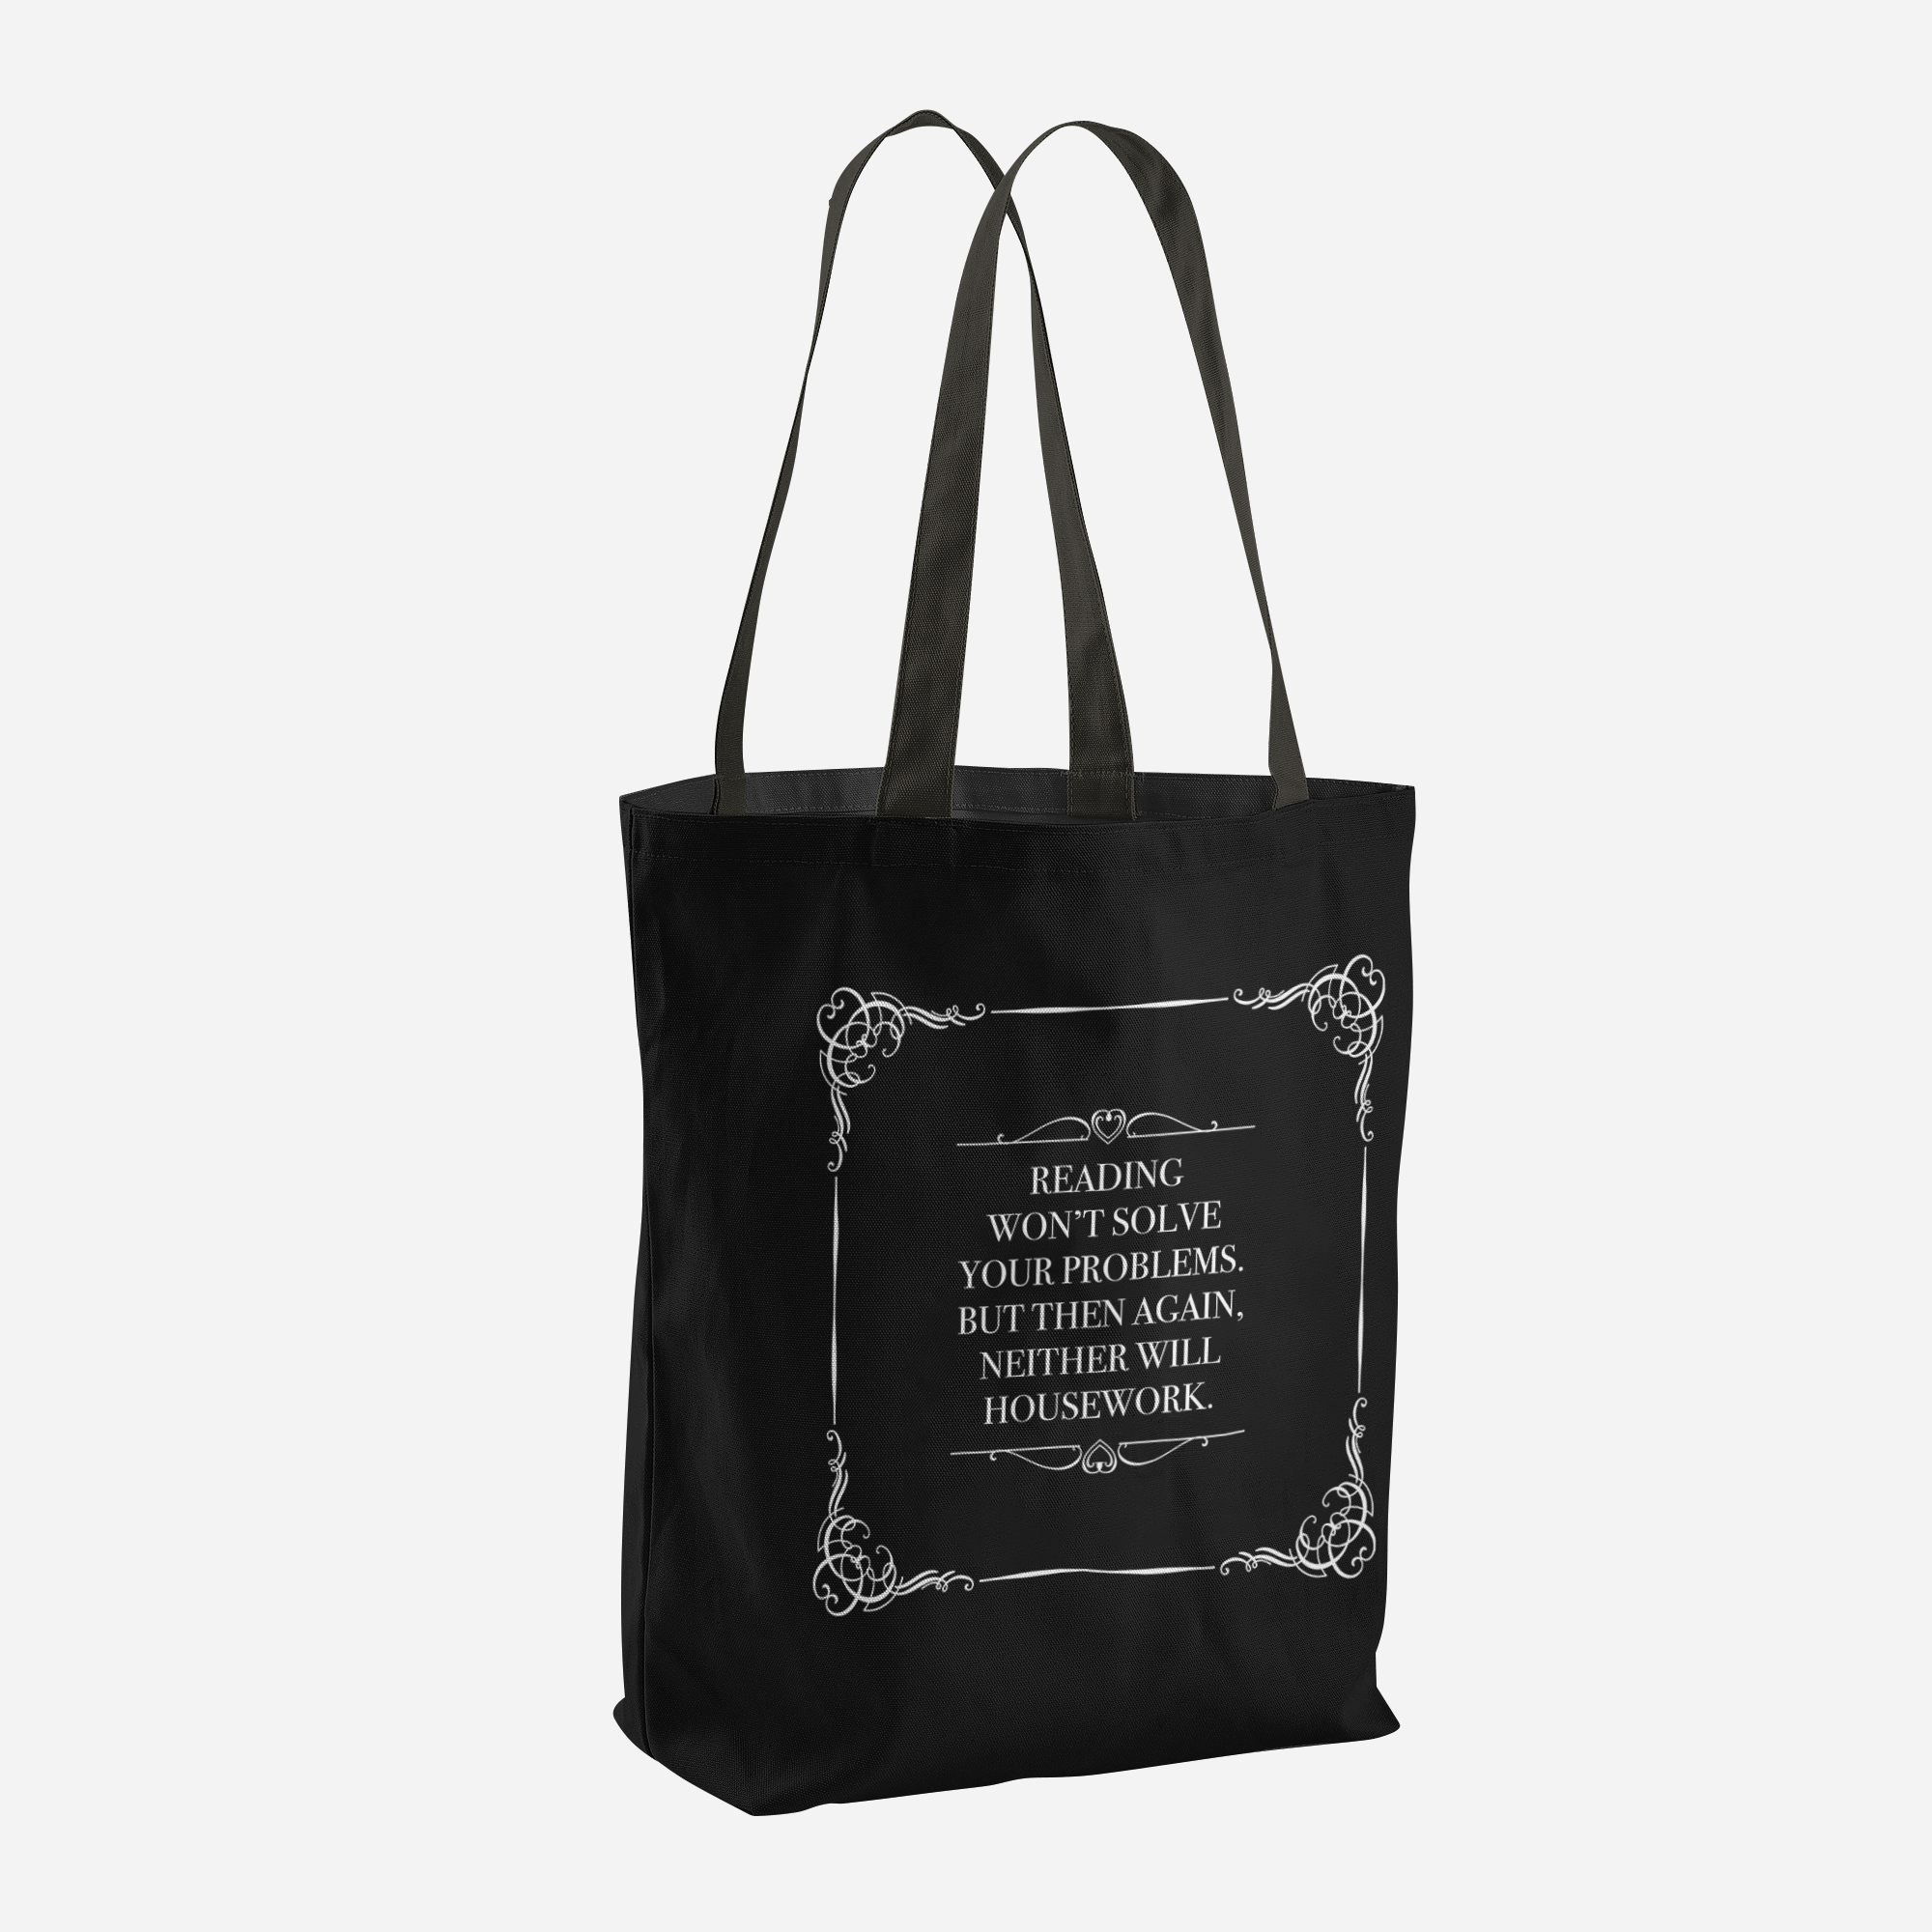 READING WON'T SOLVE YOUR PROBLEMS Tote Bag - LitLifeCo.